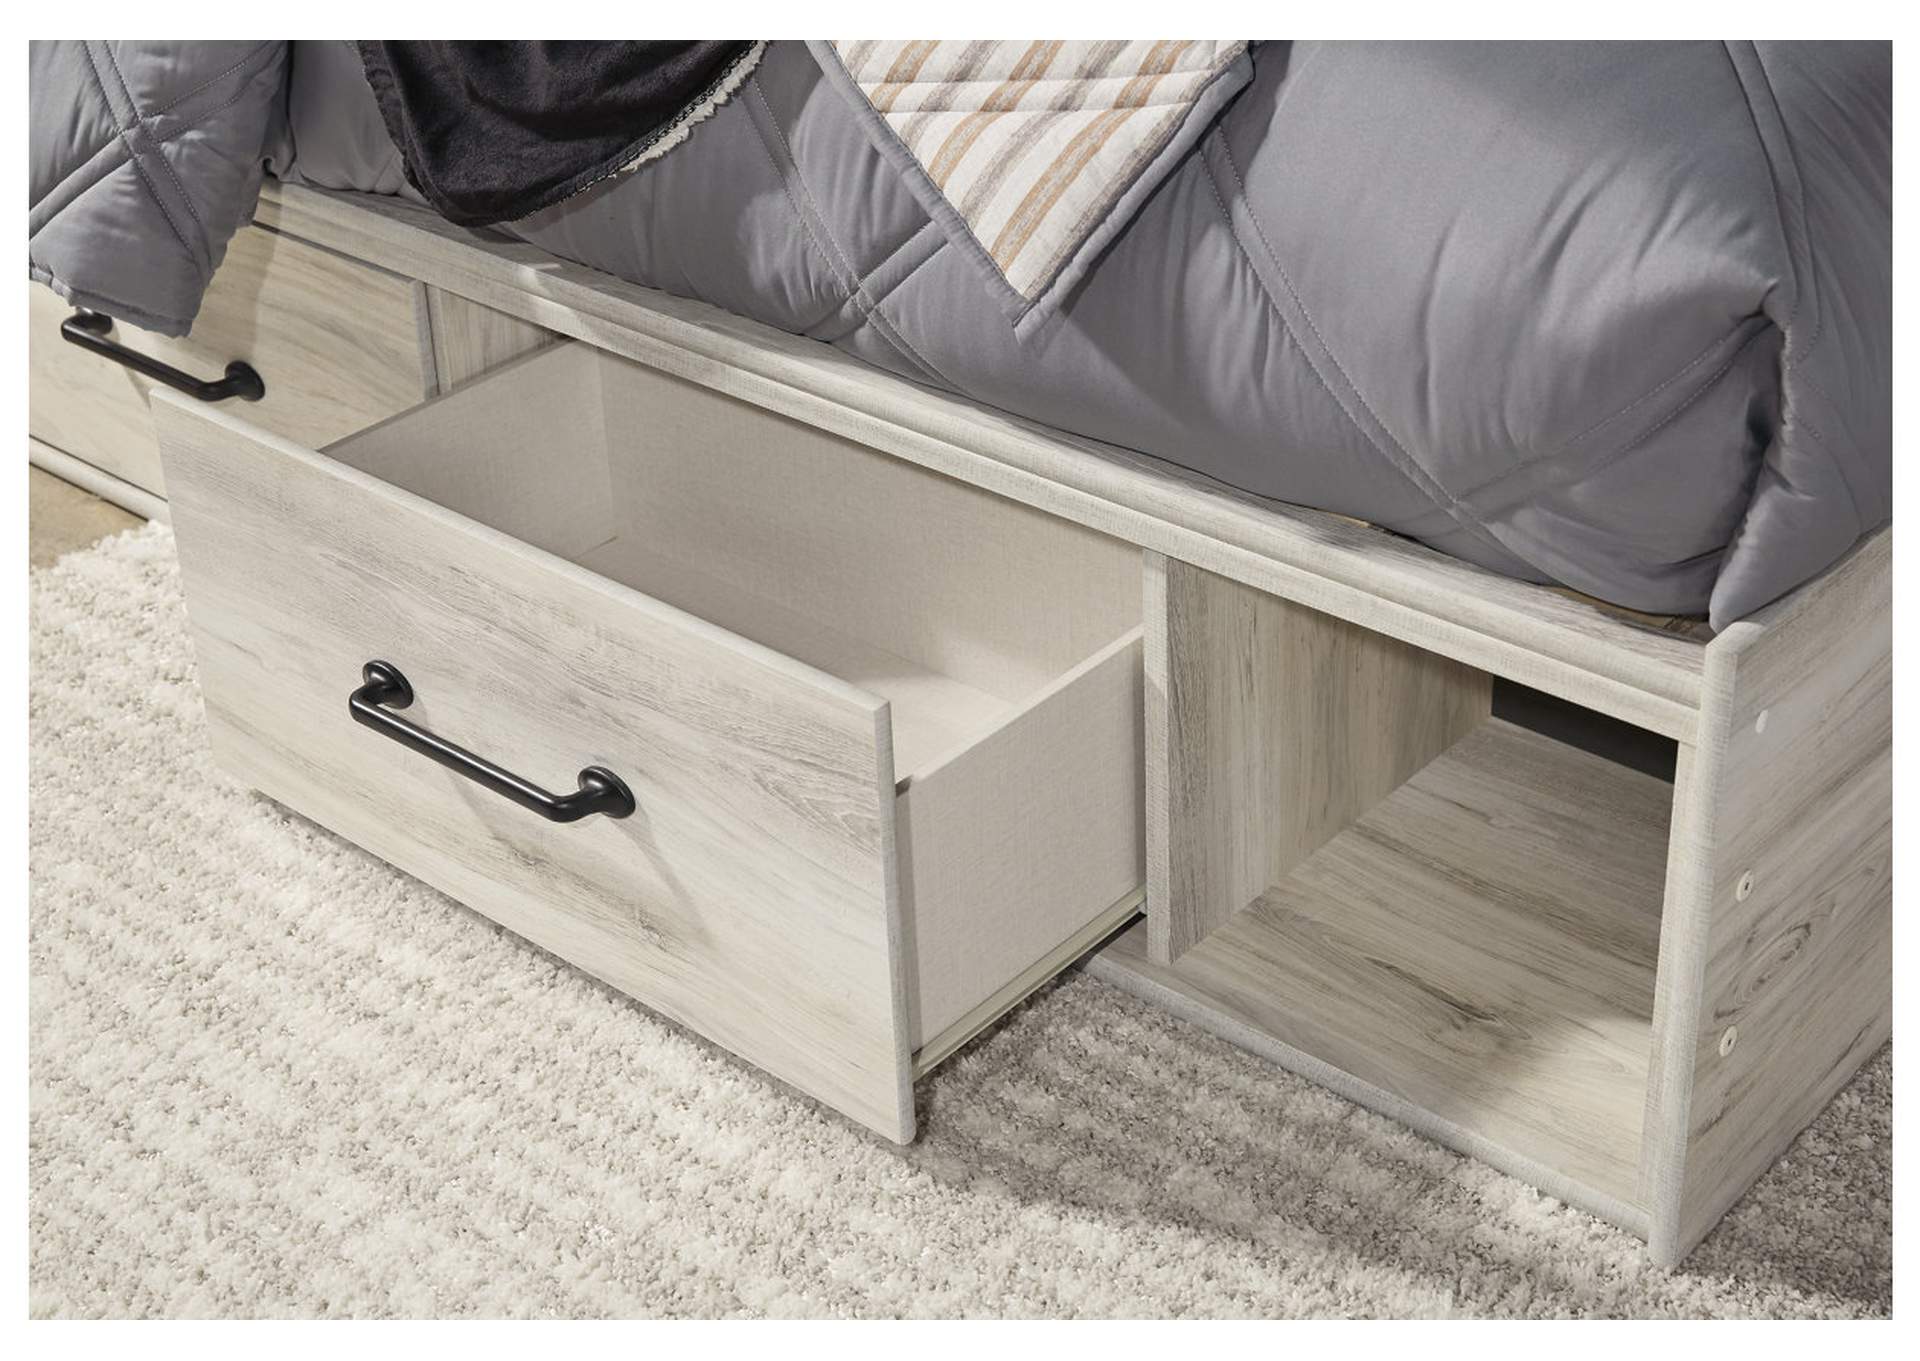 Cambeck Full Panel Bed with 4 Storage Drawers with Mirrored Dresser,Signature Design By Ashley